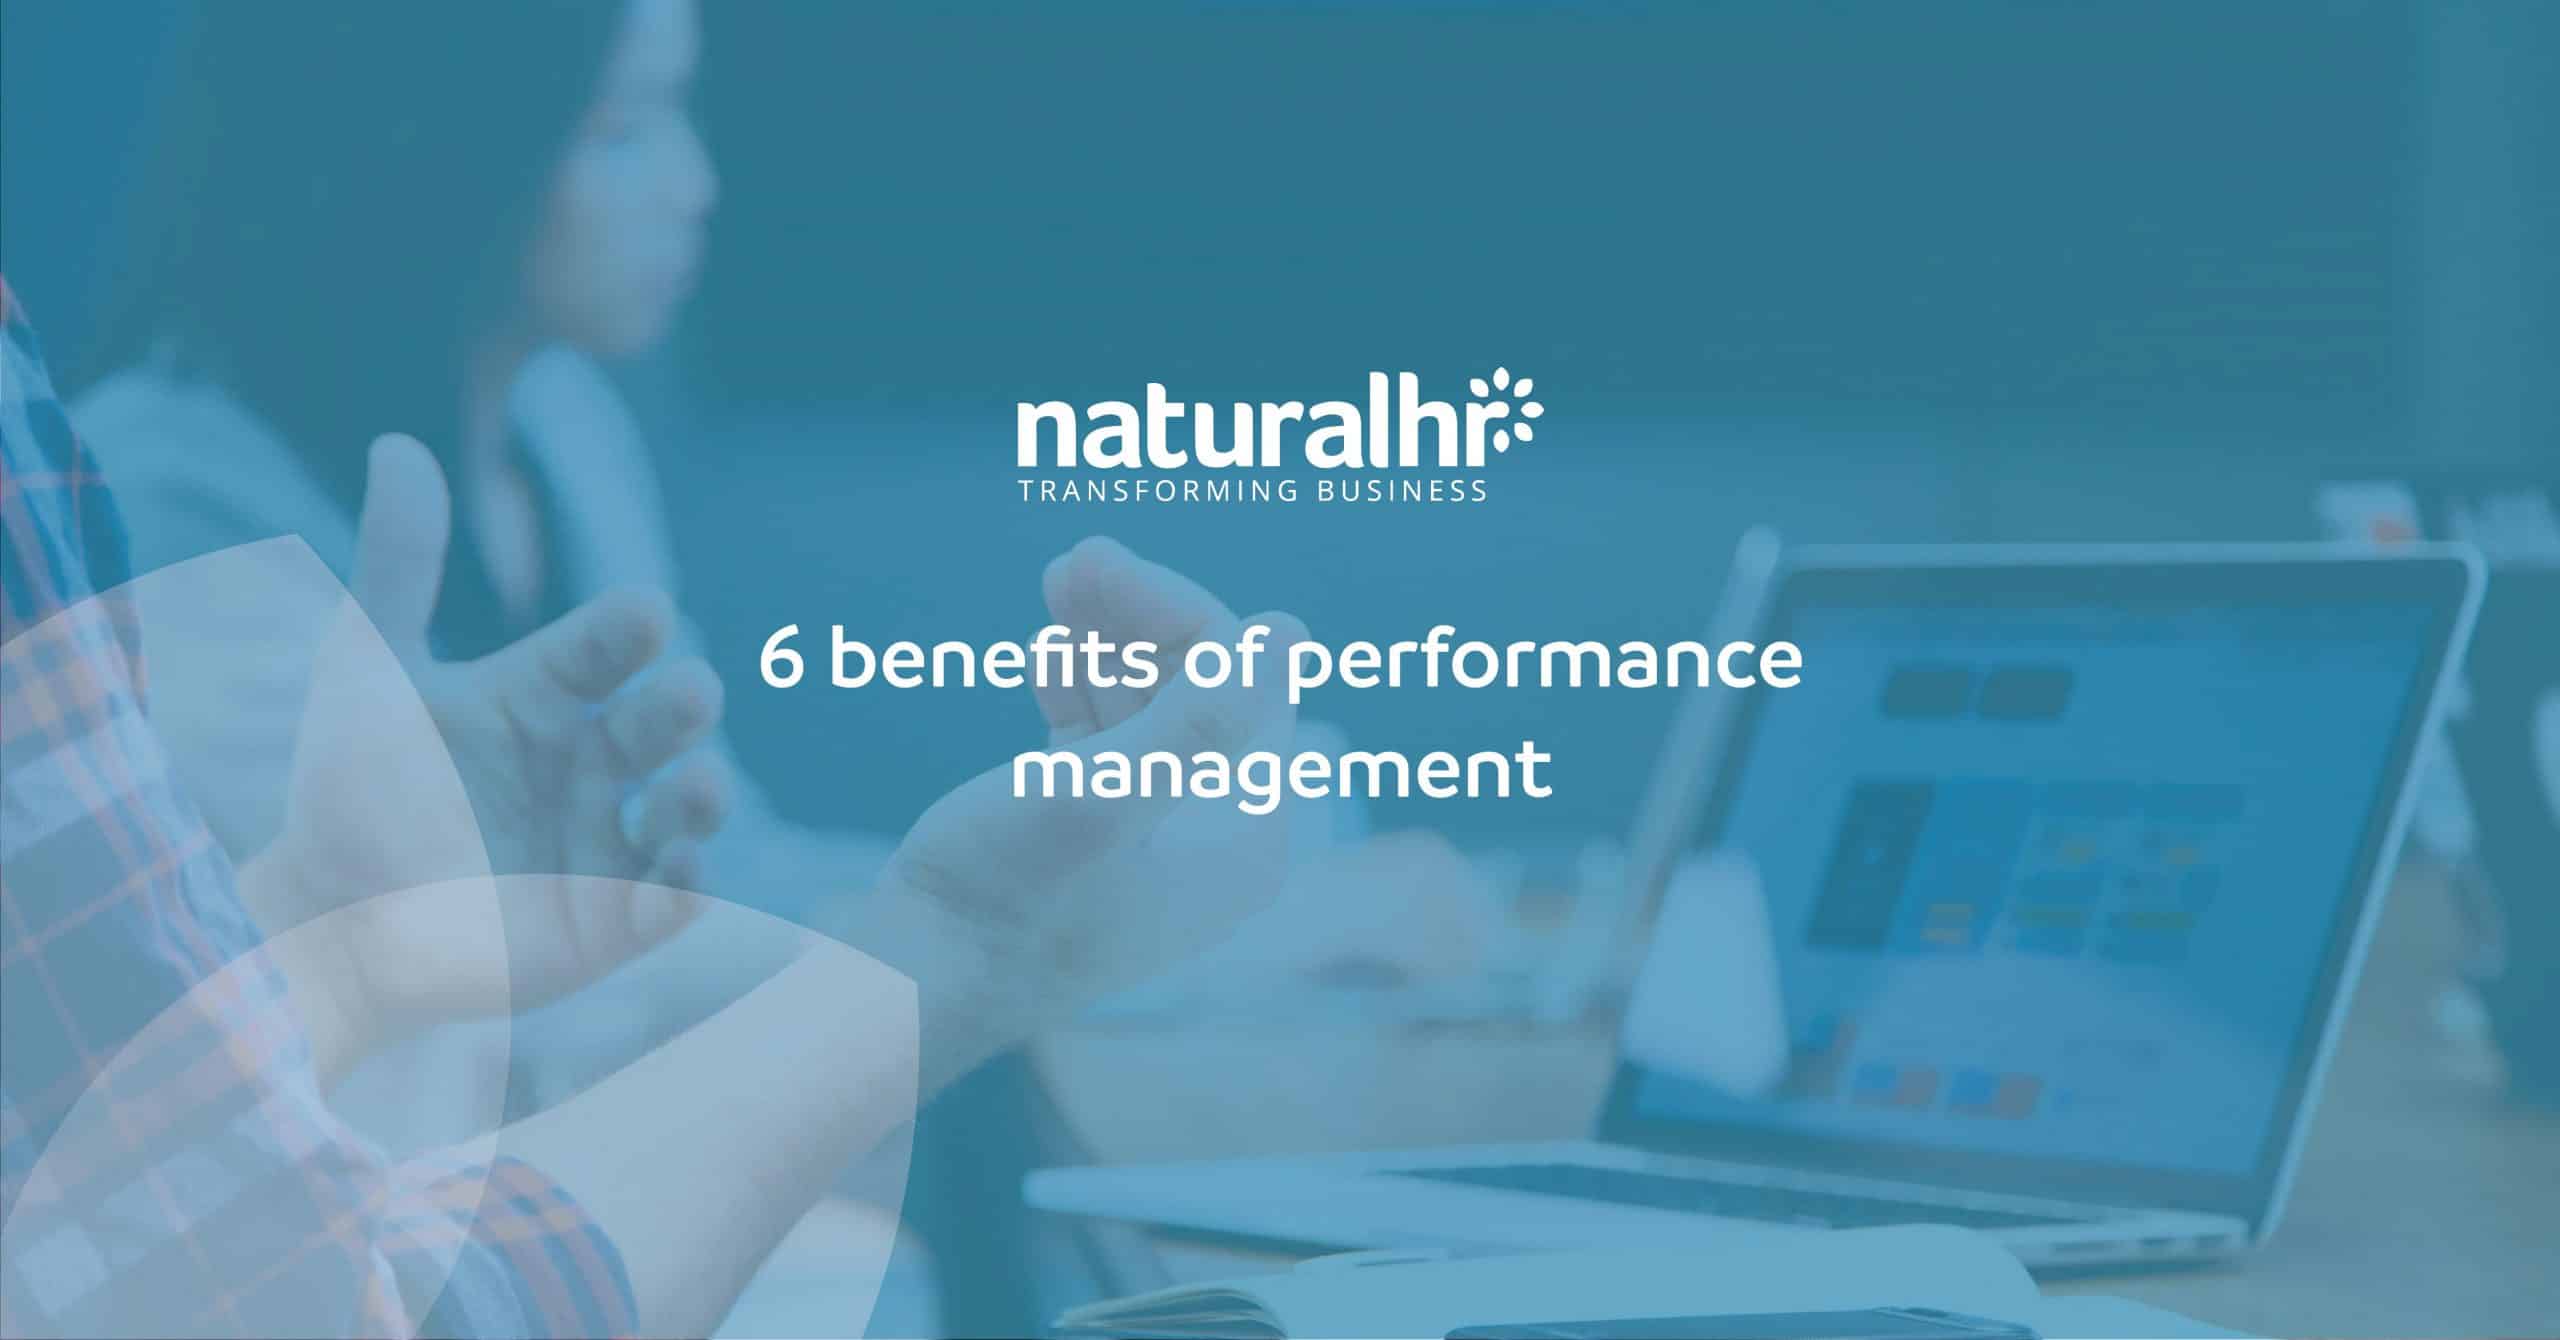 The Importance & Benefits of Managing Employee Performance